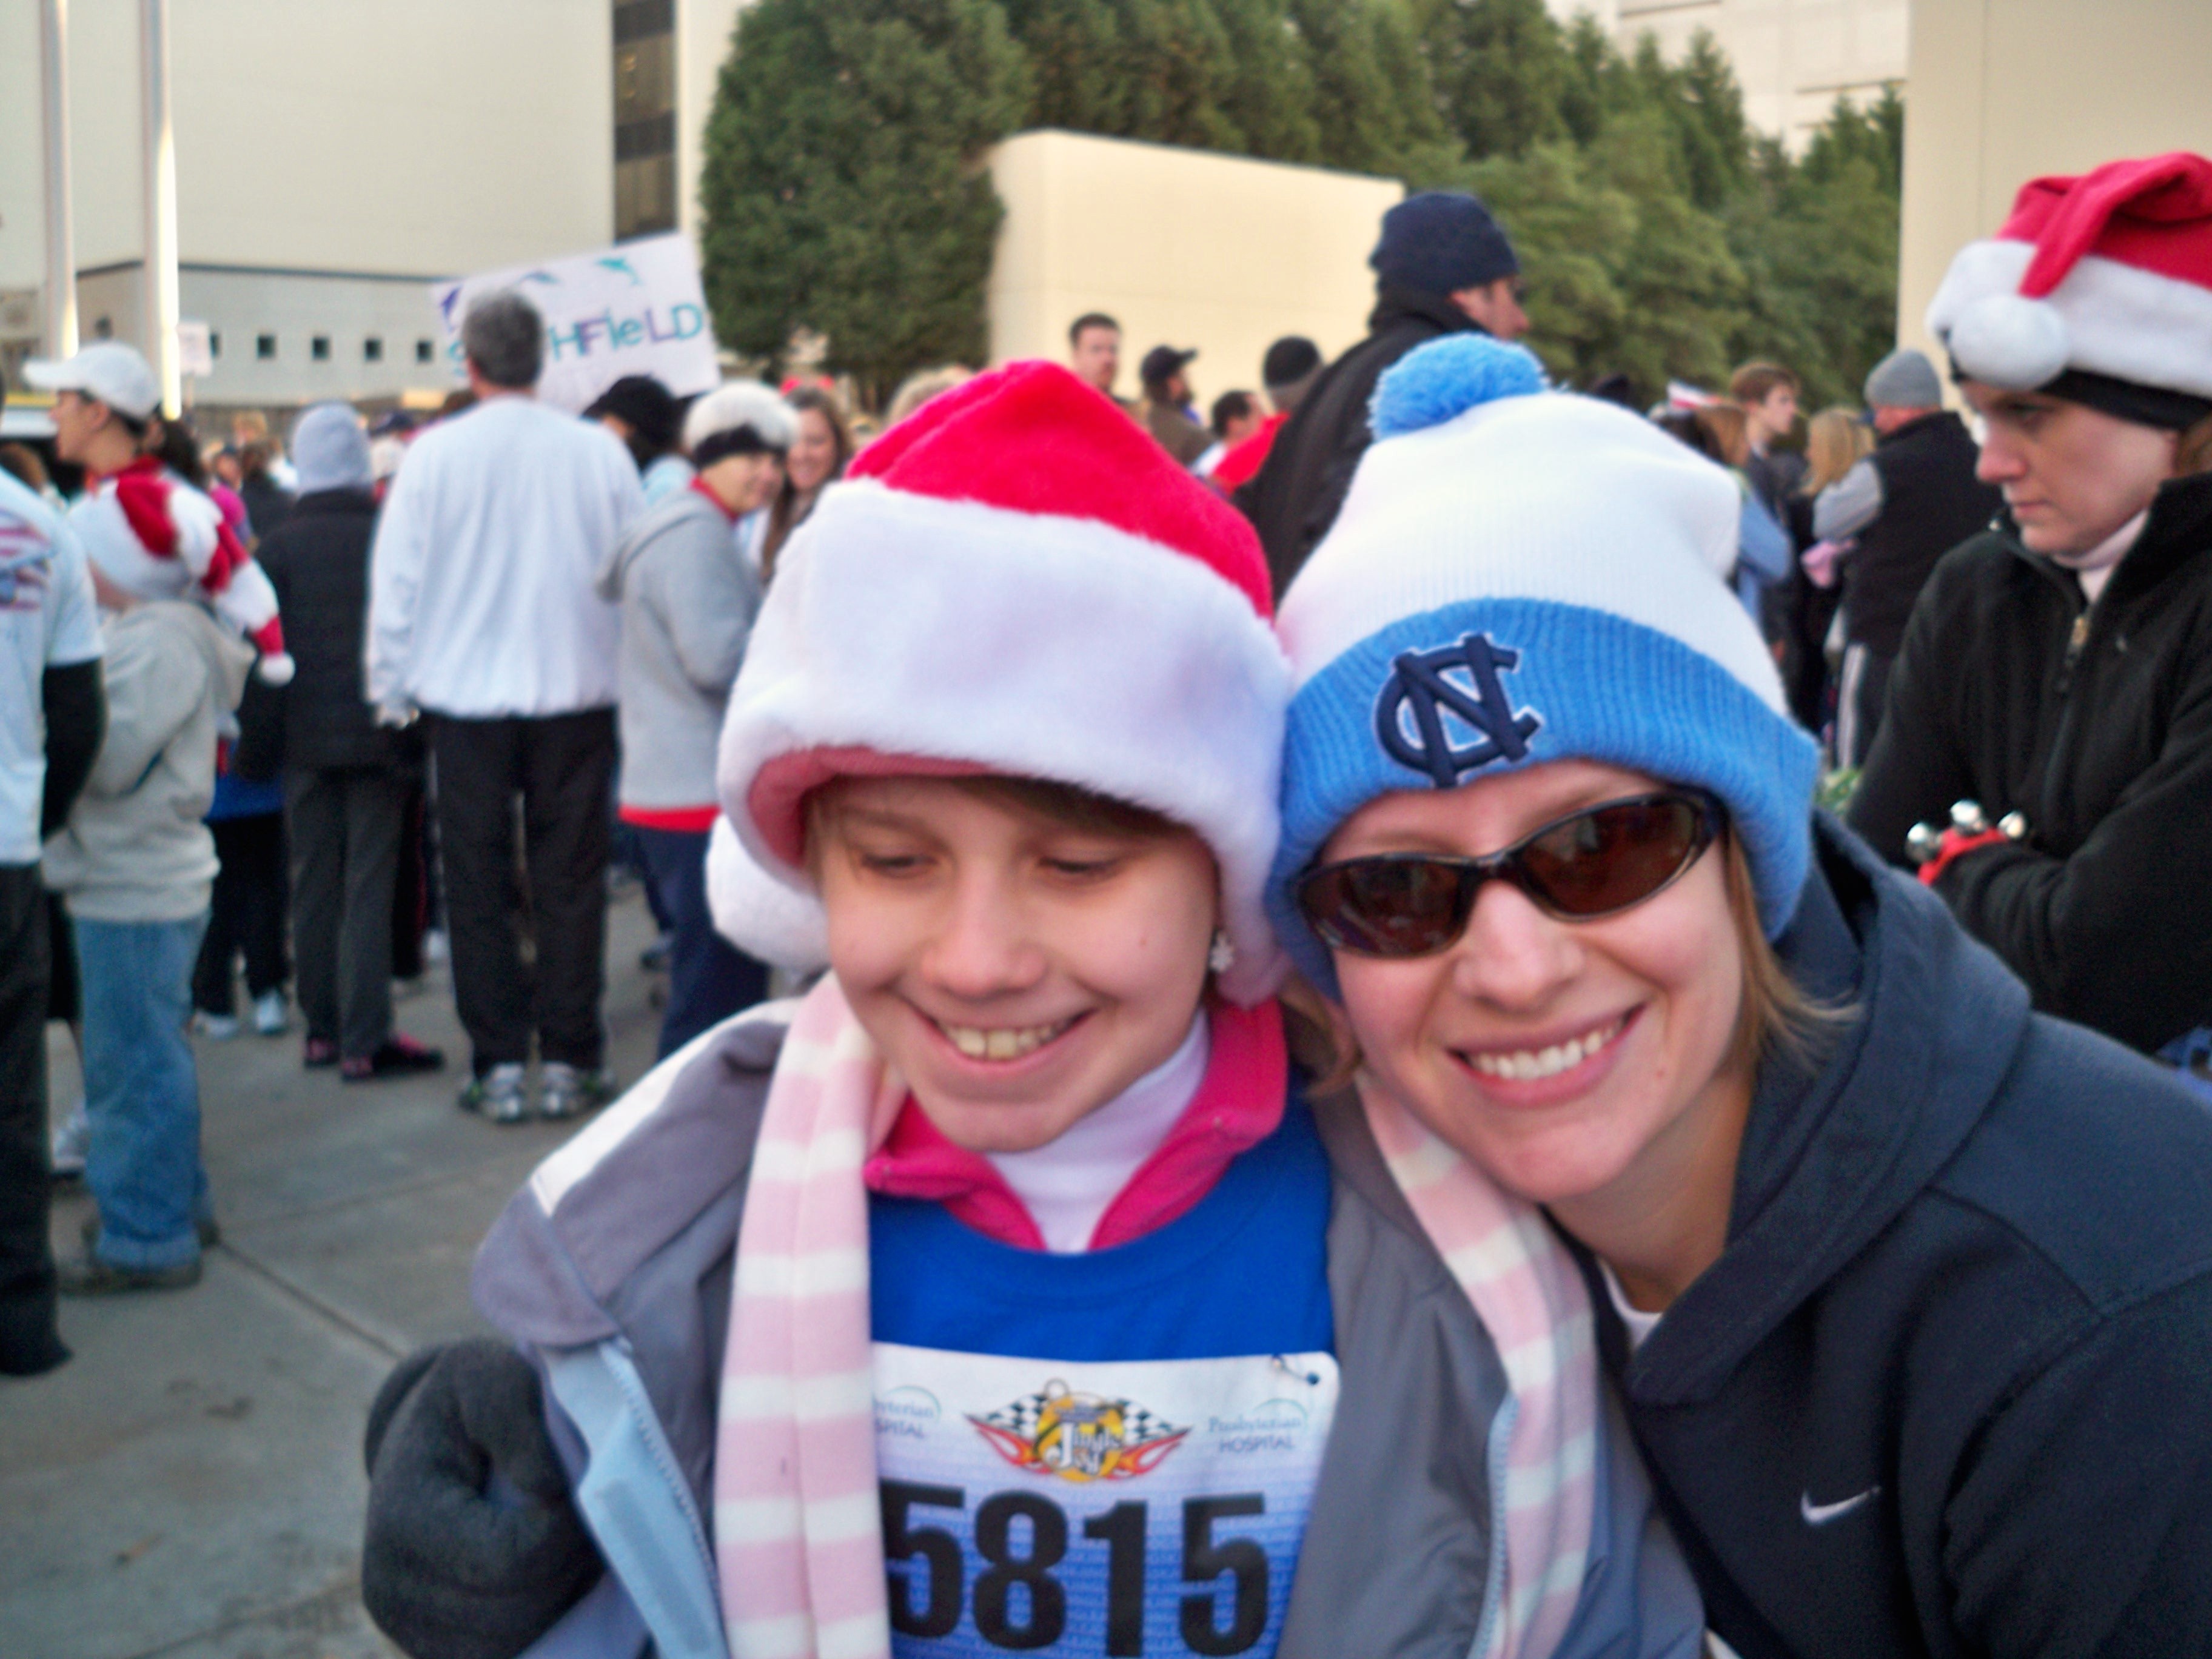 Taylor and Laura after the Jingle Jog 5K in 2008